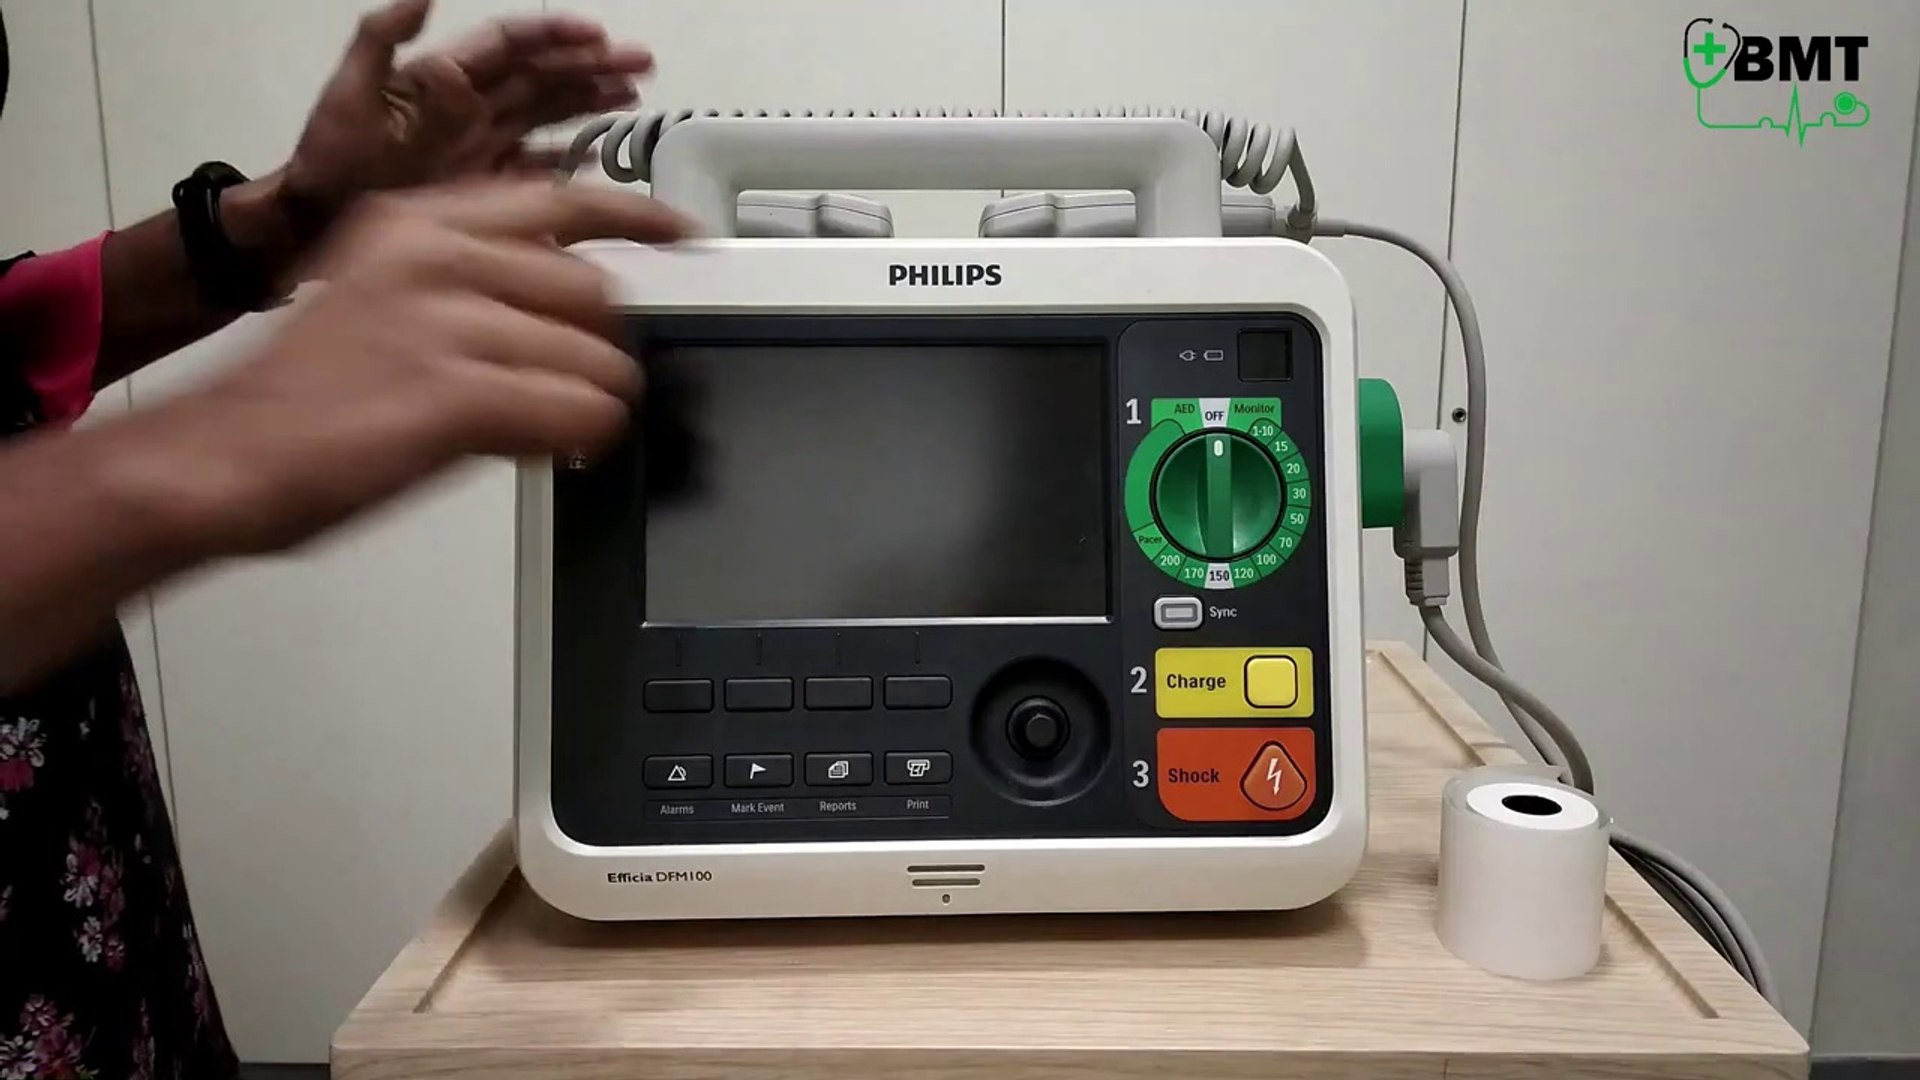 Philips DFM100 | How to use Defibrillator | Philips defibrillator  demonstration - video Dailymotion